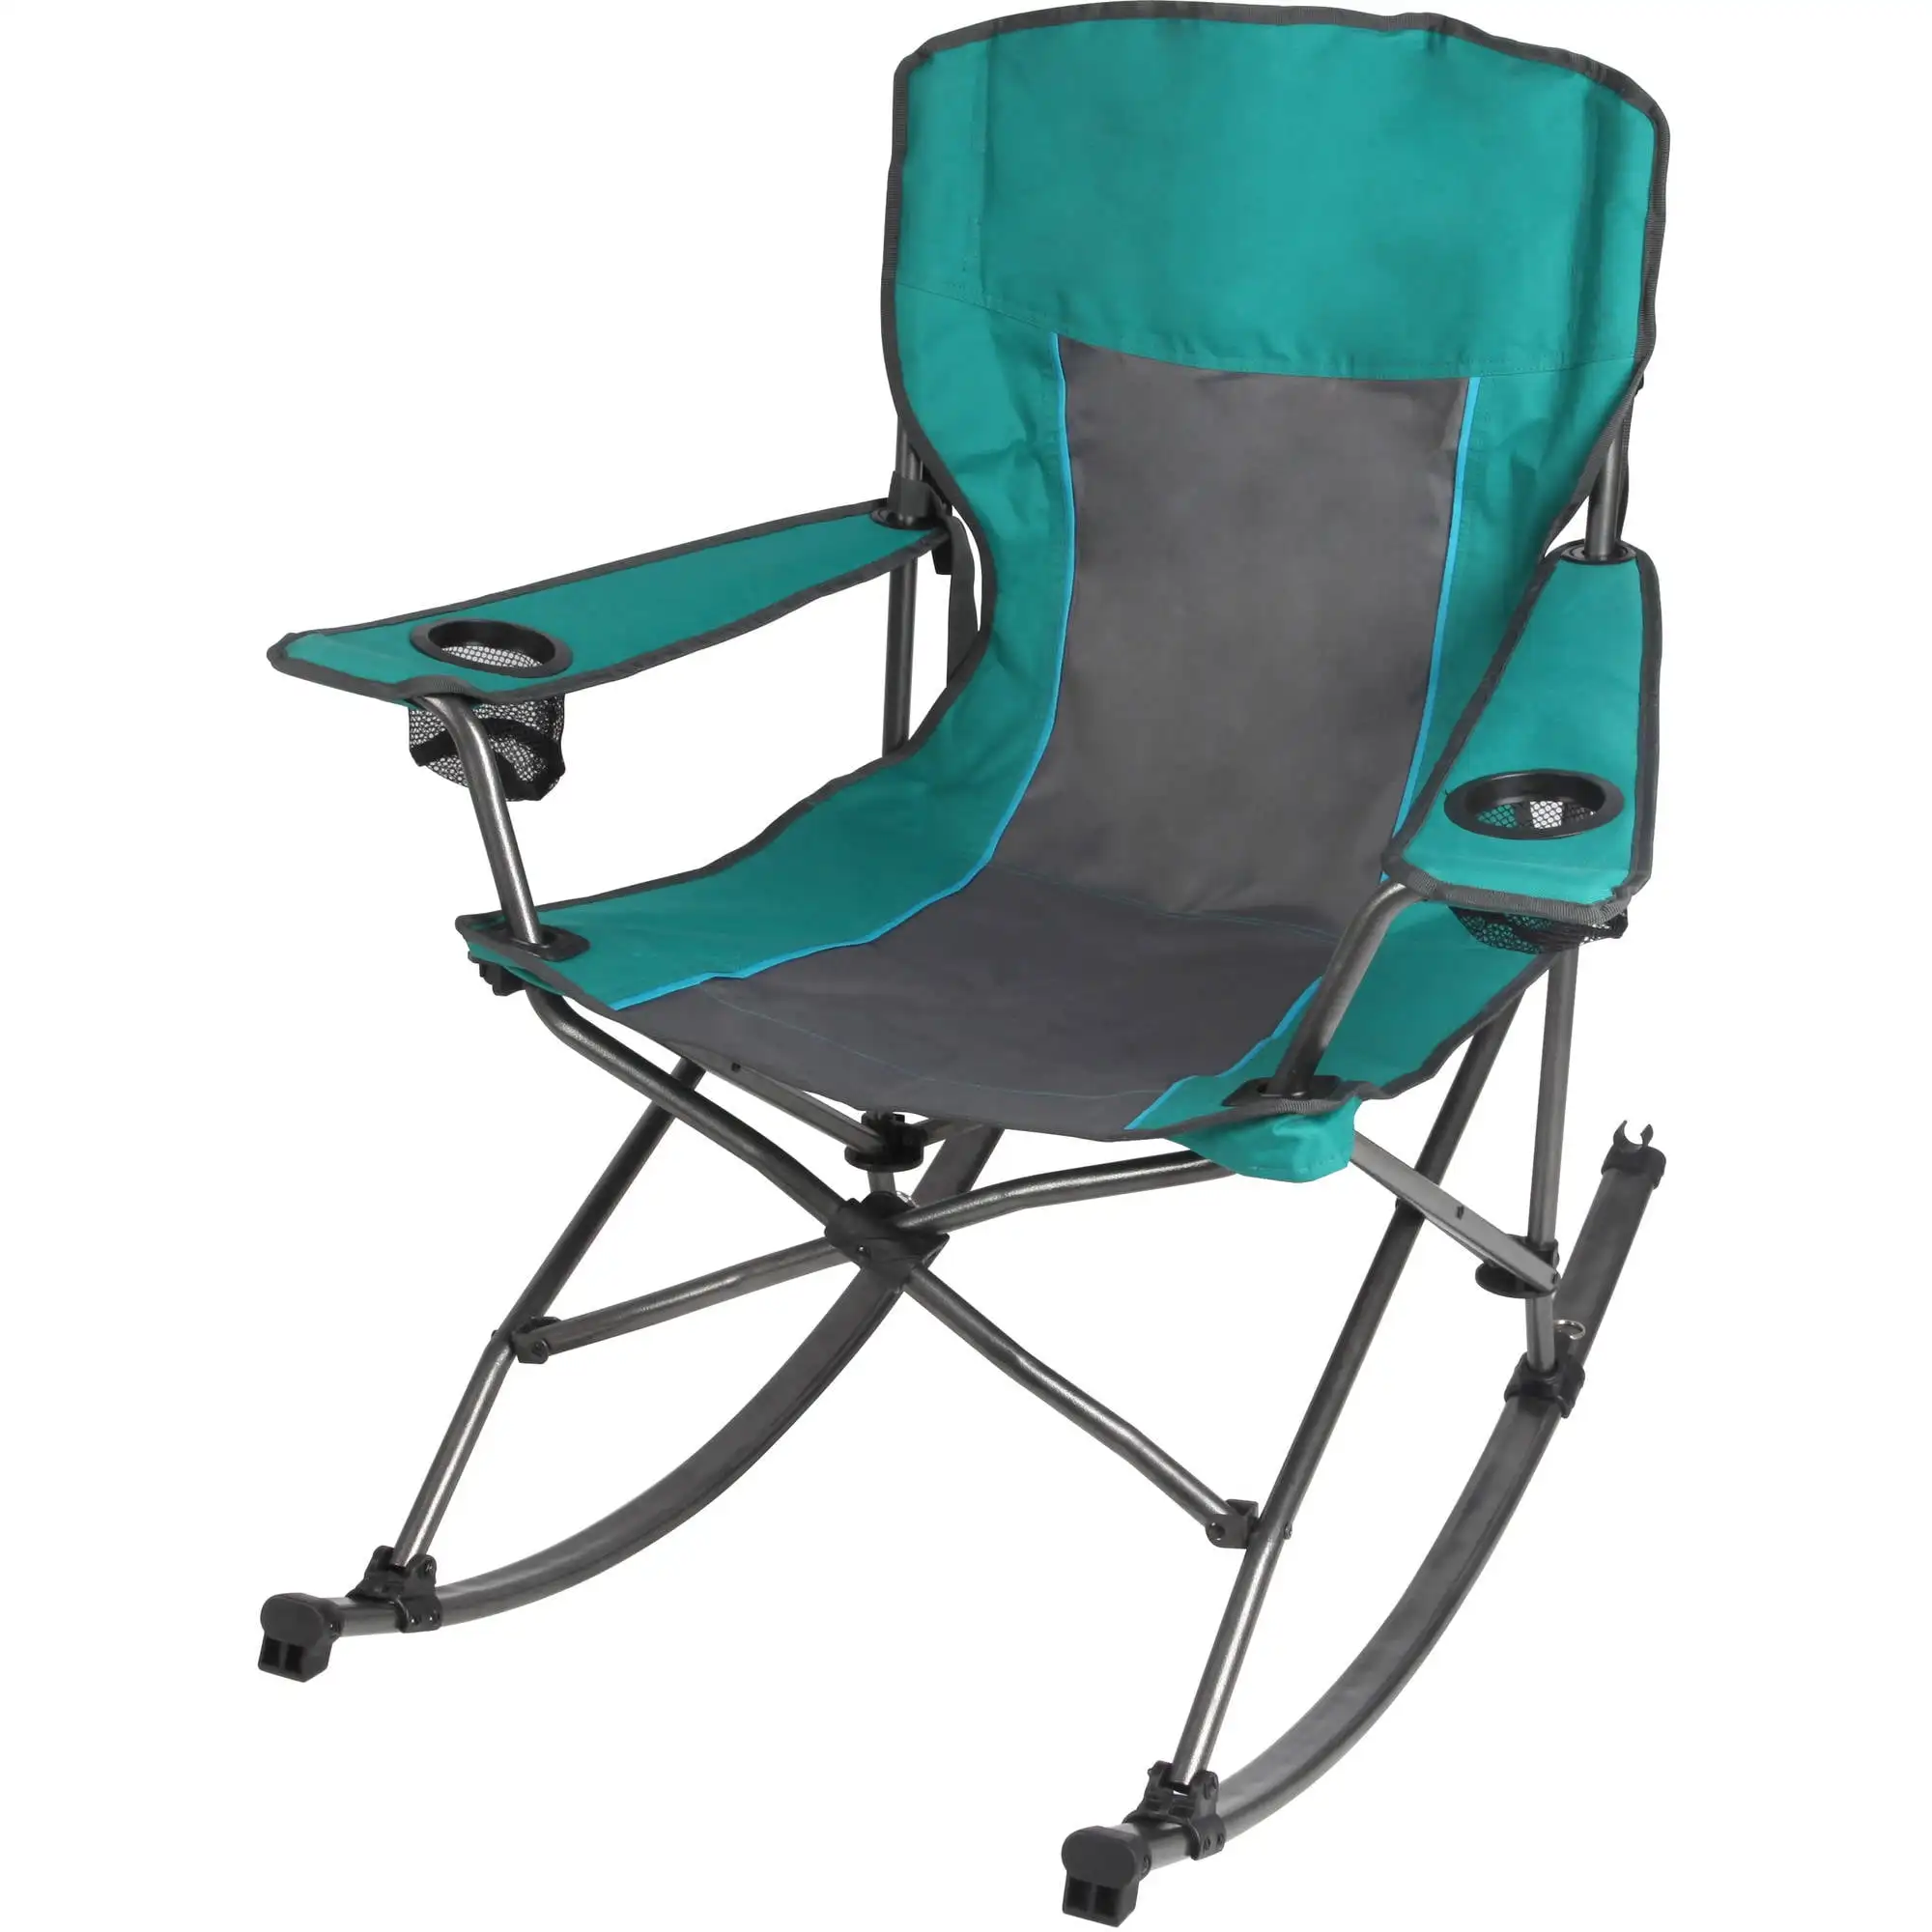  camping rocking chair green 300 lbs capacity adult camping chairs chair outdoor chair thumb200